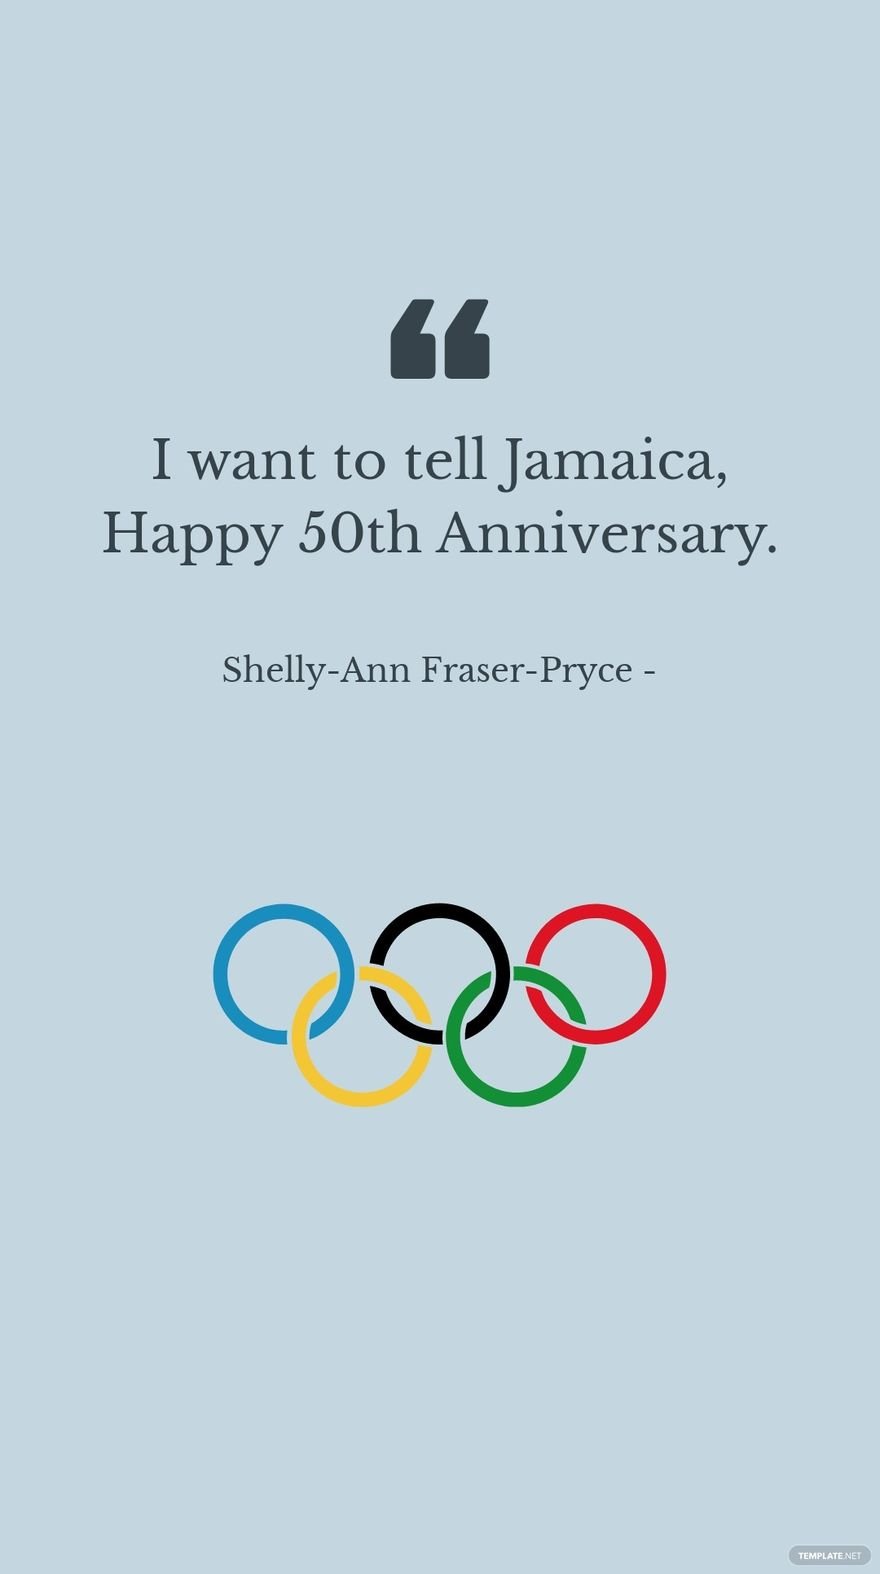 Shelly-Ann Fraser-Pryce - I want to tell Jamaica, Happy 50th Anniversary.